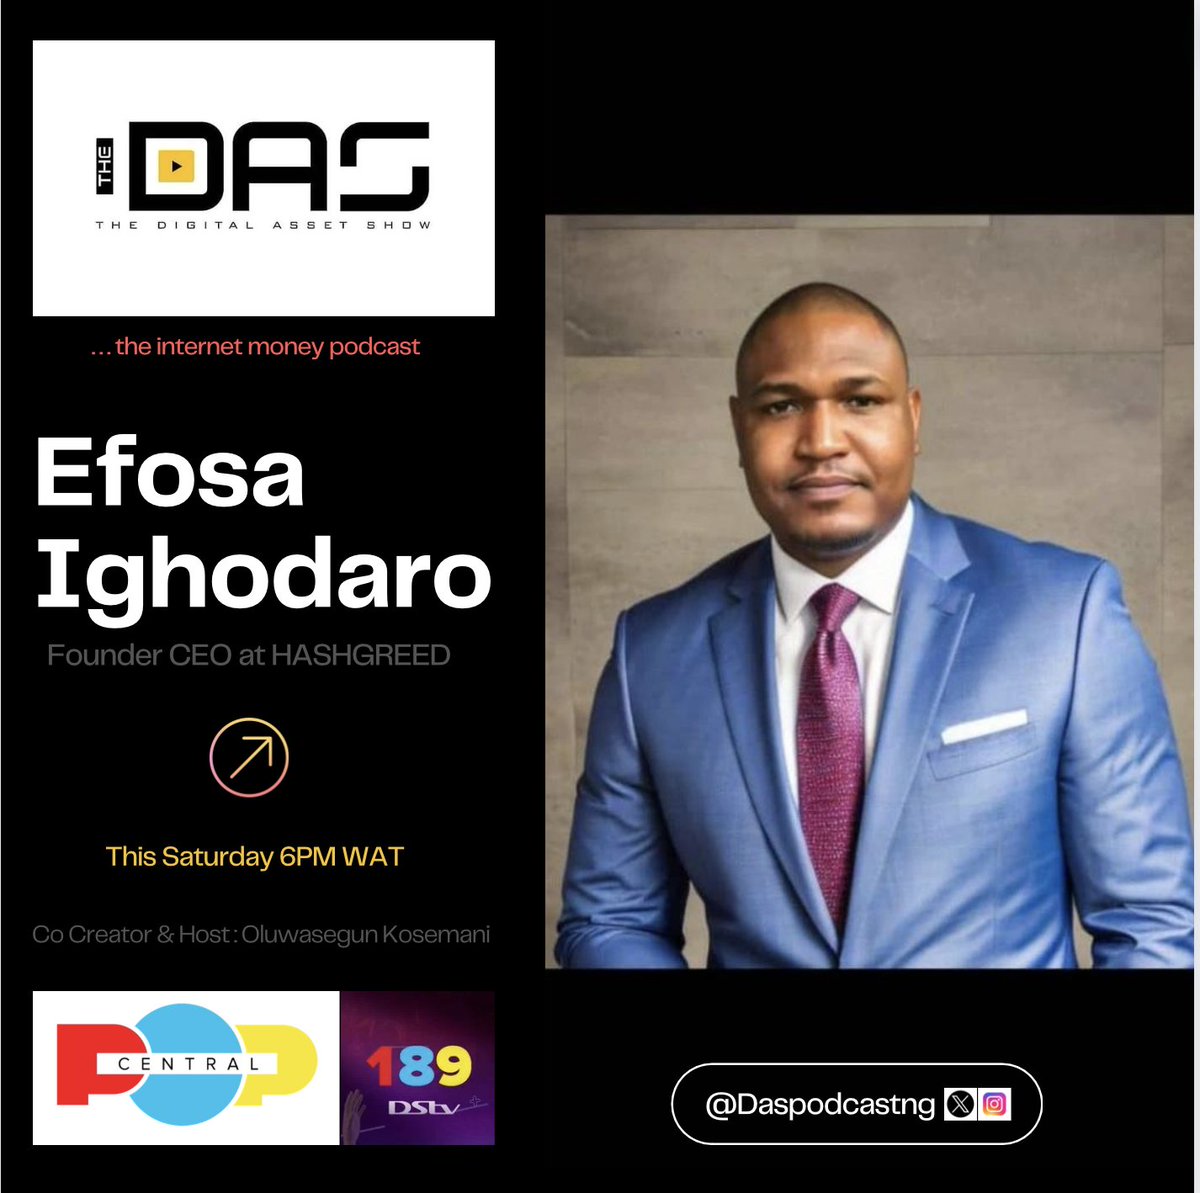 Our CEO, Efosa Ighodaro will be live on DSTV 189, Popcentral station on the Digital Asset Show tomorrow 6pm, discussing Hashgreed, SEC and Real World Assets tokenization #RWA #DigitalAssets #Cryptocurency #africa #BlockchainInnovation #Nigeria #Lagos